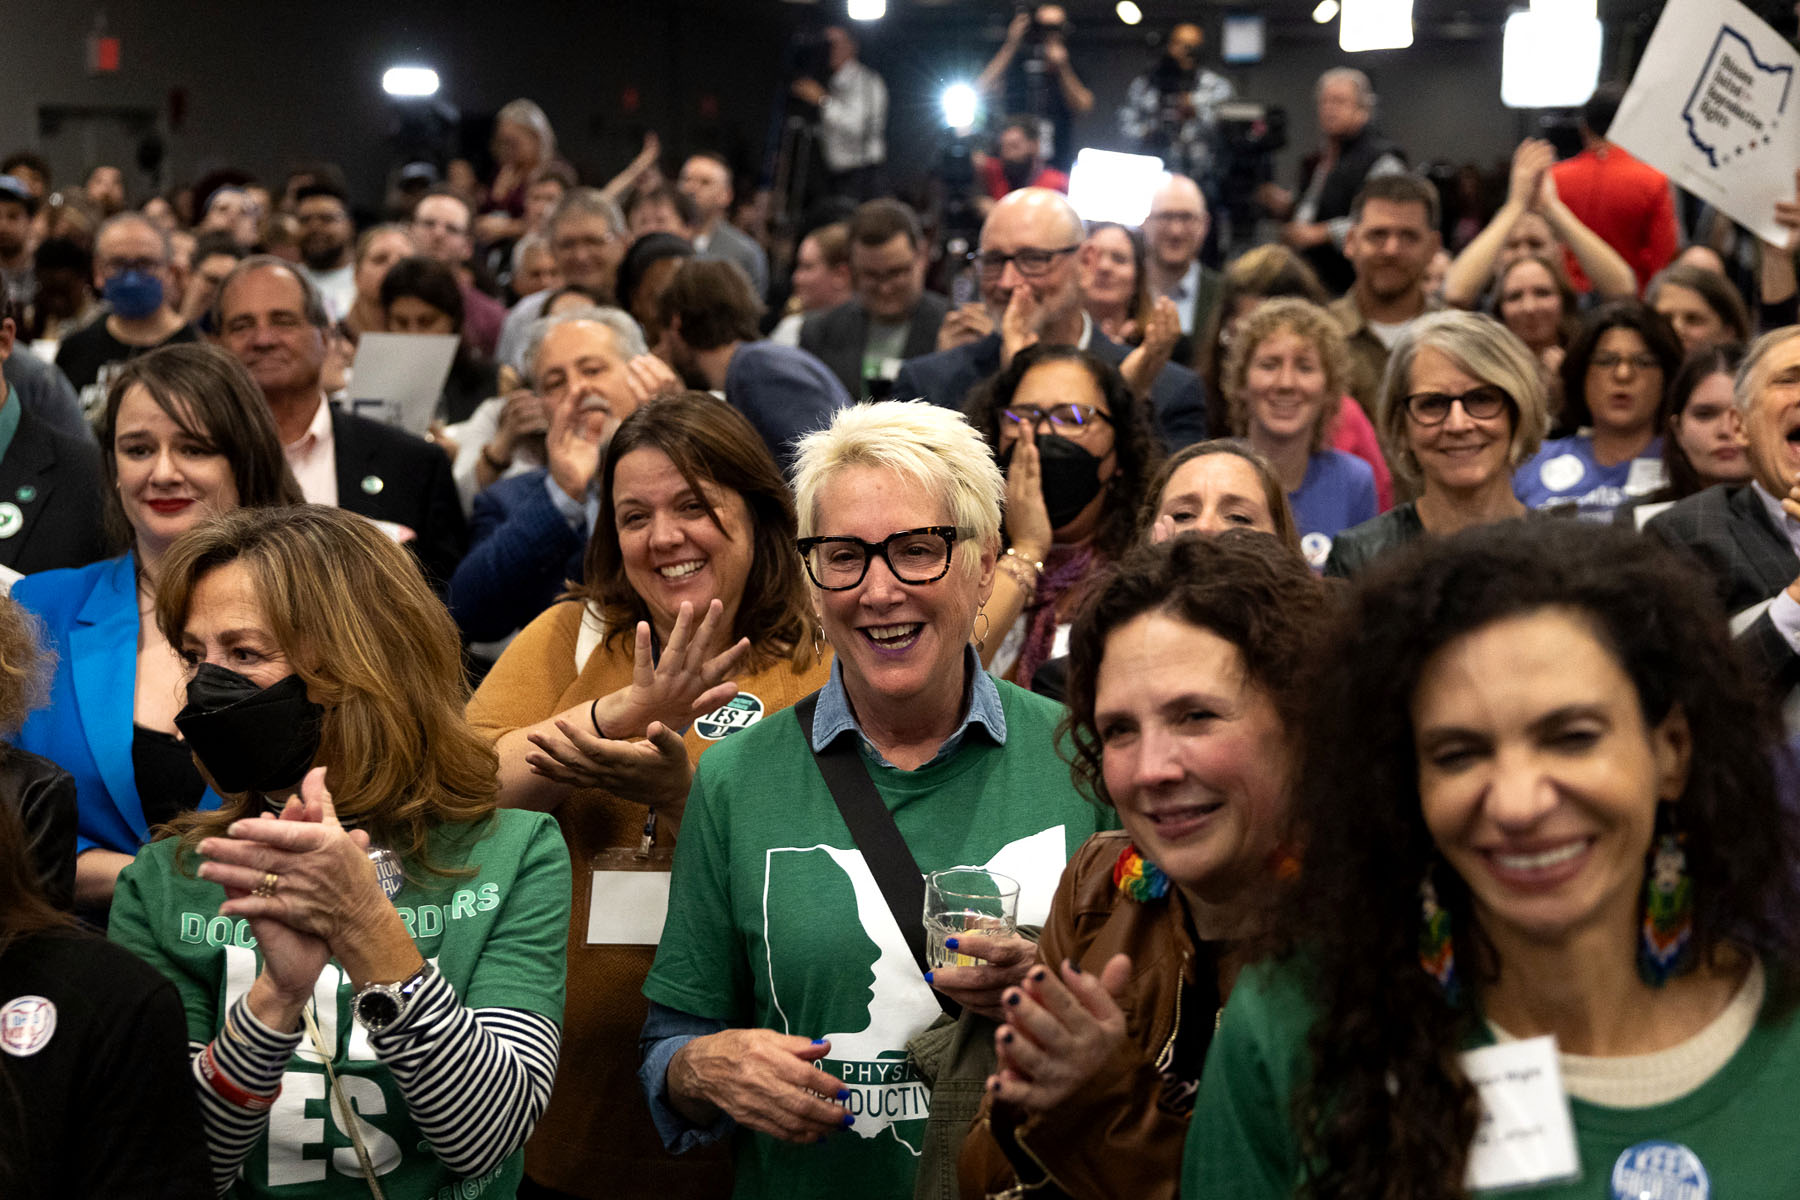 Abortion rights supporters celebrate winning the referendum on Issue 1 in Columbus, Ohio.